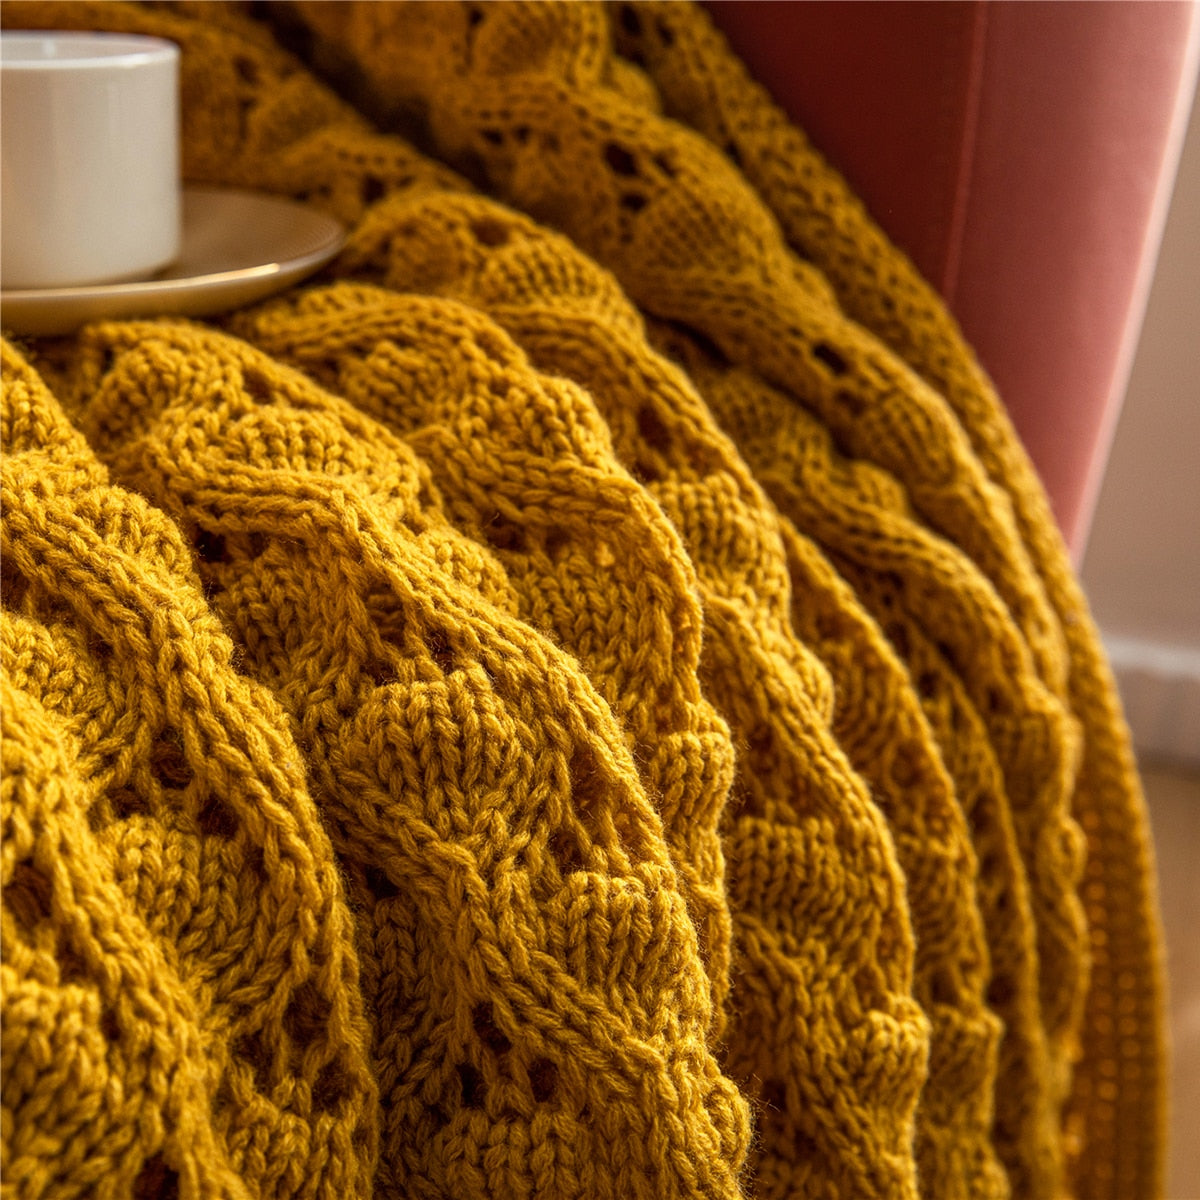 The Lacy Throw Blanket